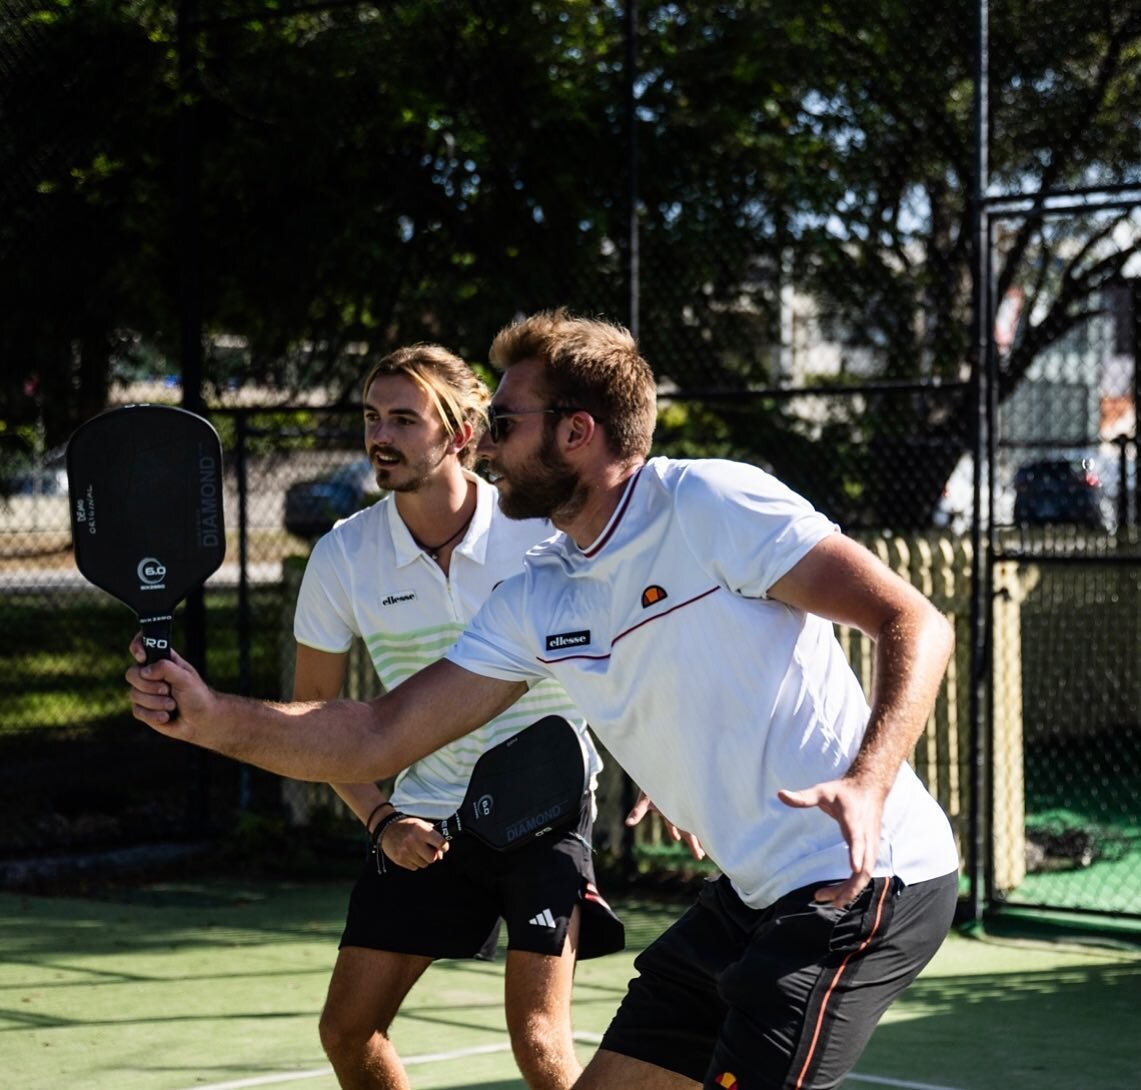 Come and try Pickleball, the racquet sport taking Australia by storm.

The talented coaches at @discoversportsgroupsydney will give you all the tips &amp; tricks, with the latest equipment from @sixzeropickleball 

All party tickets include access to